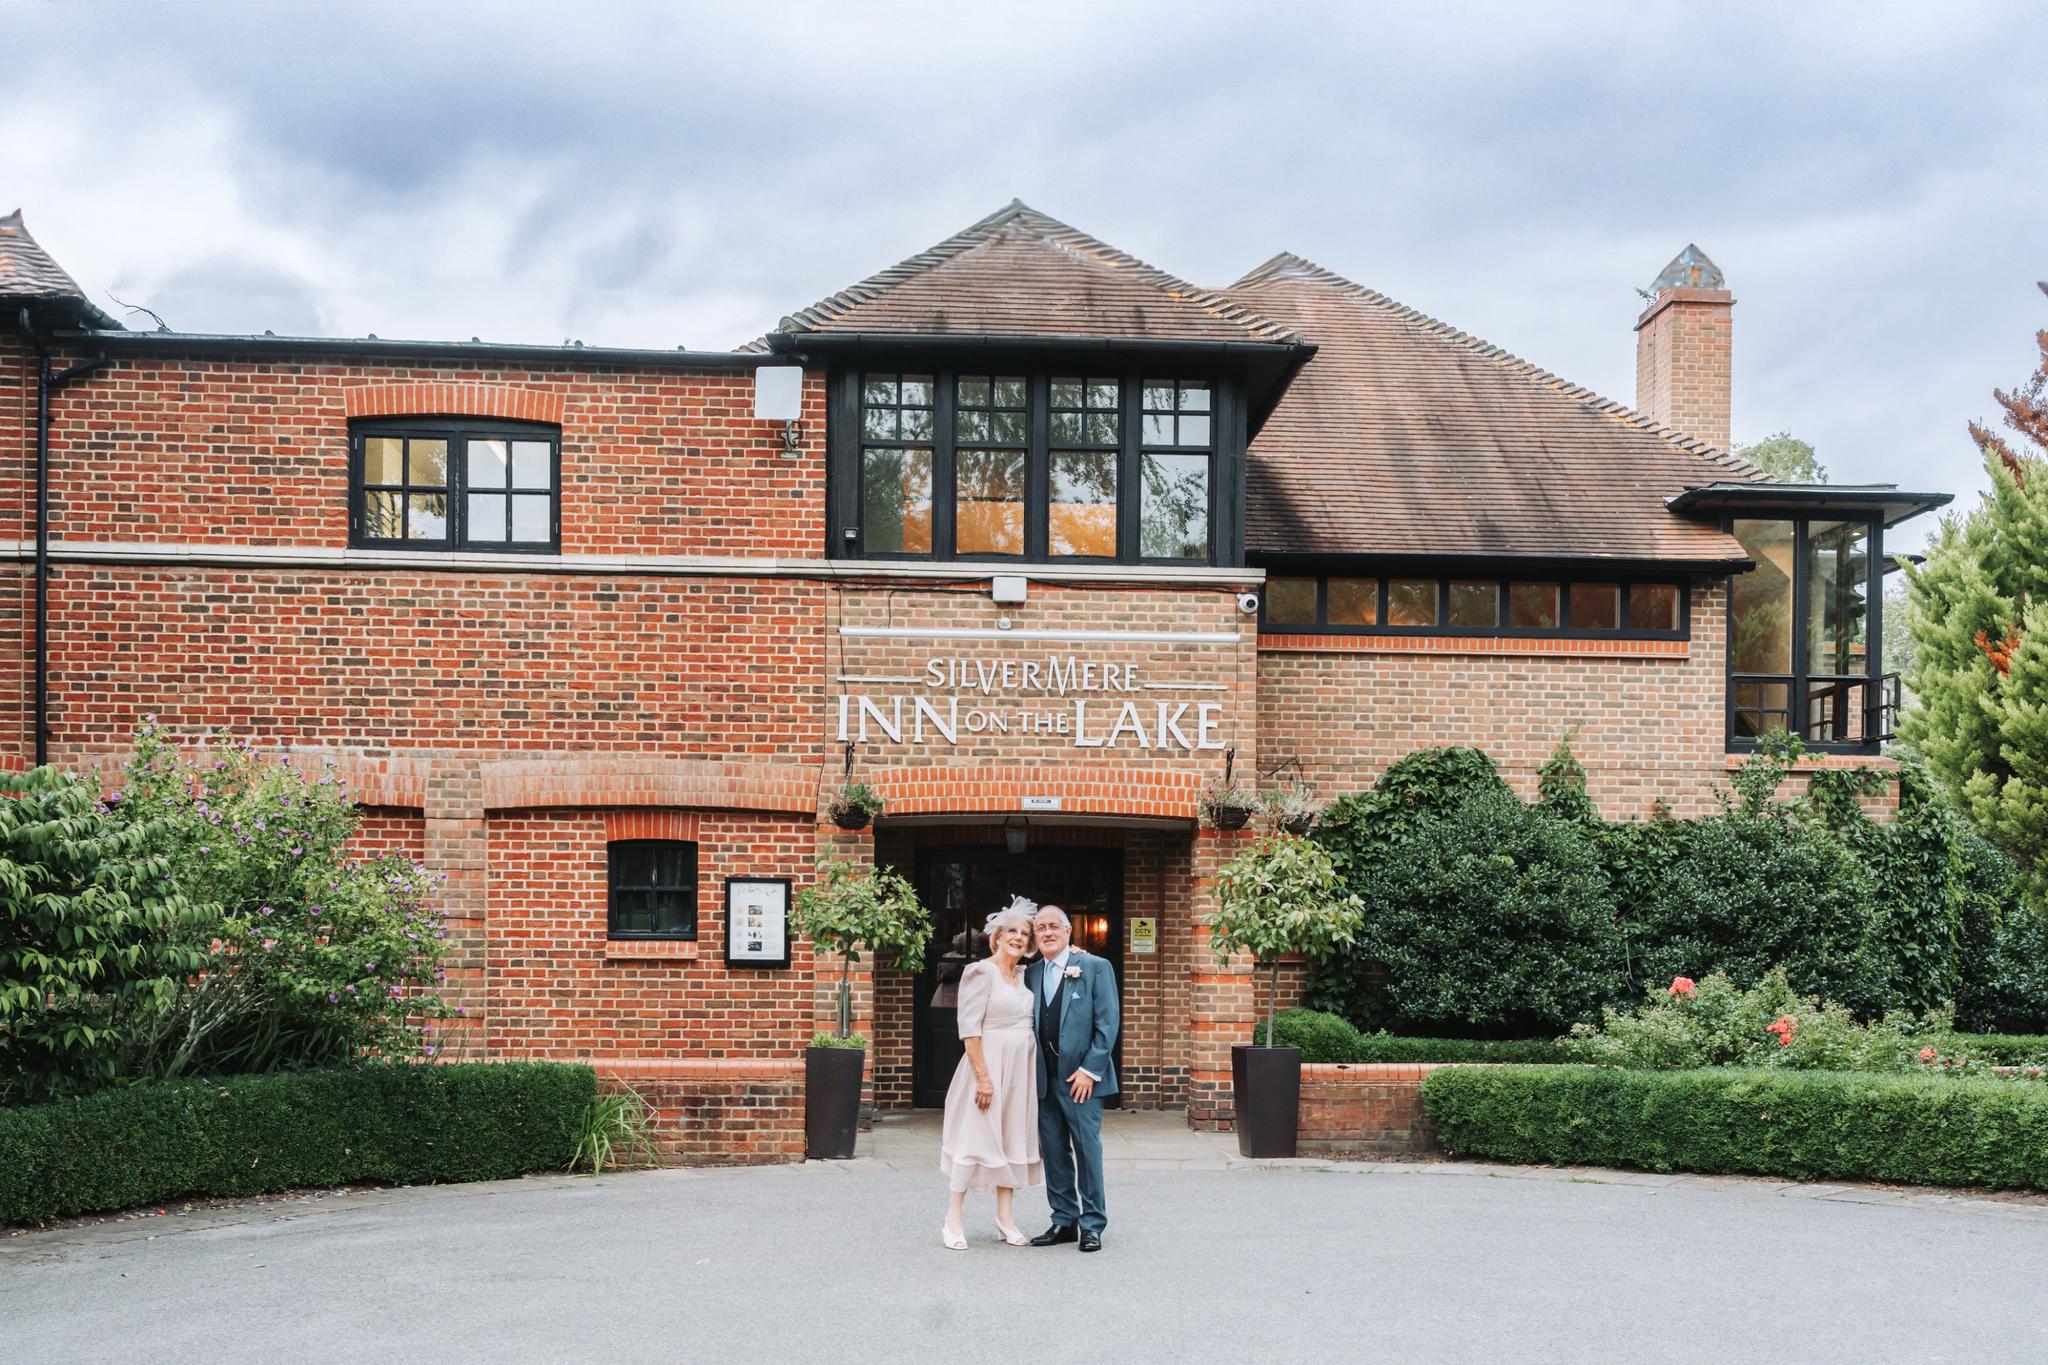 An Unforgettable Wedding Tale at Silvermere Inn on the Lake